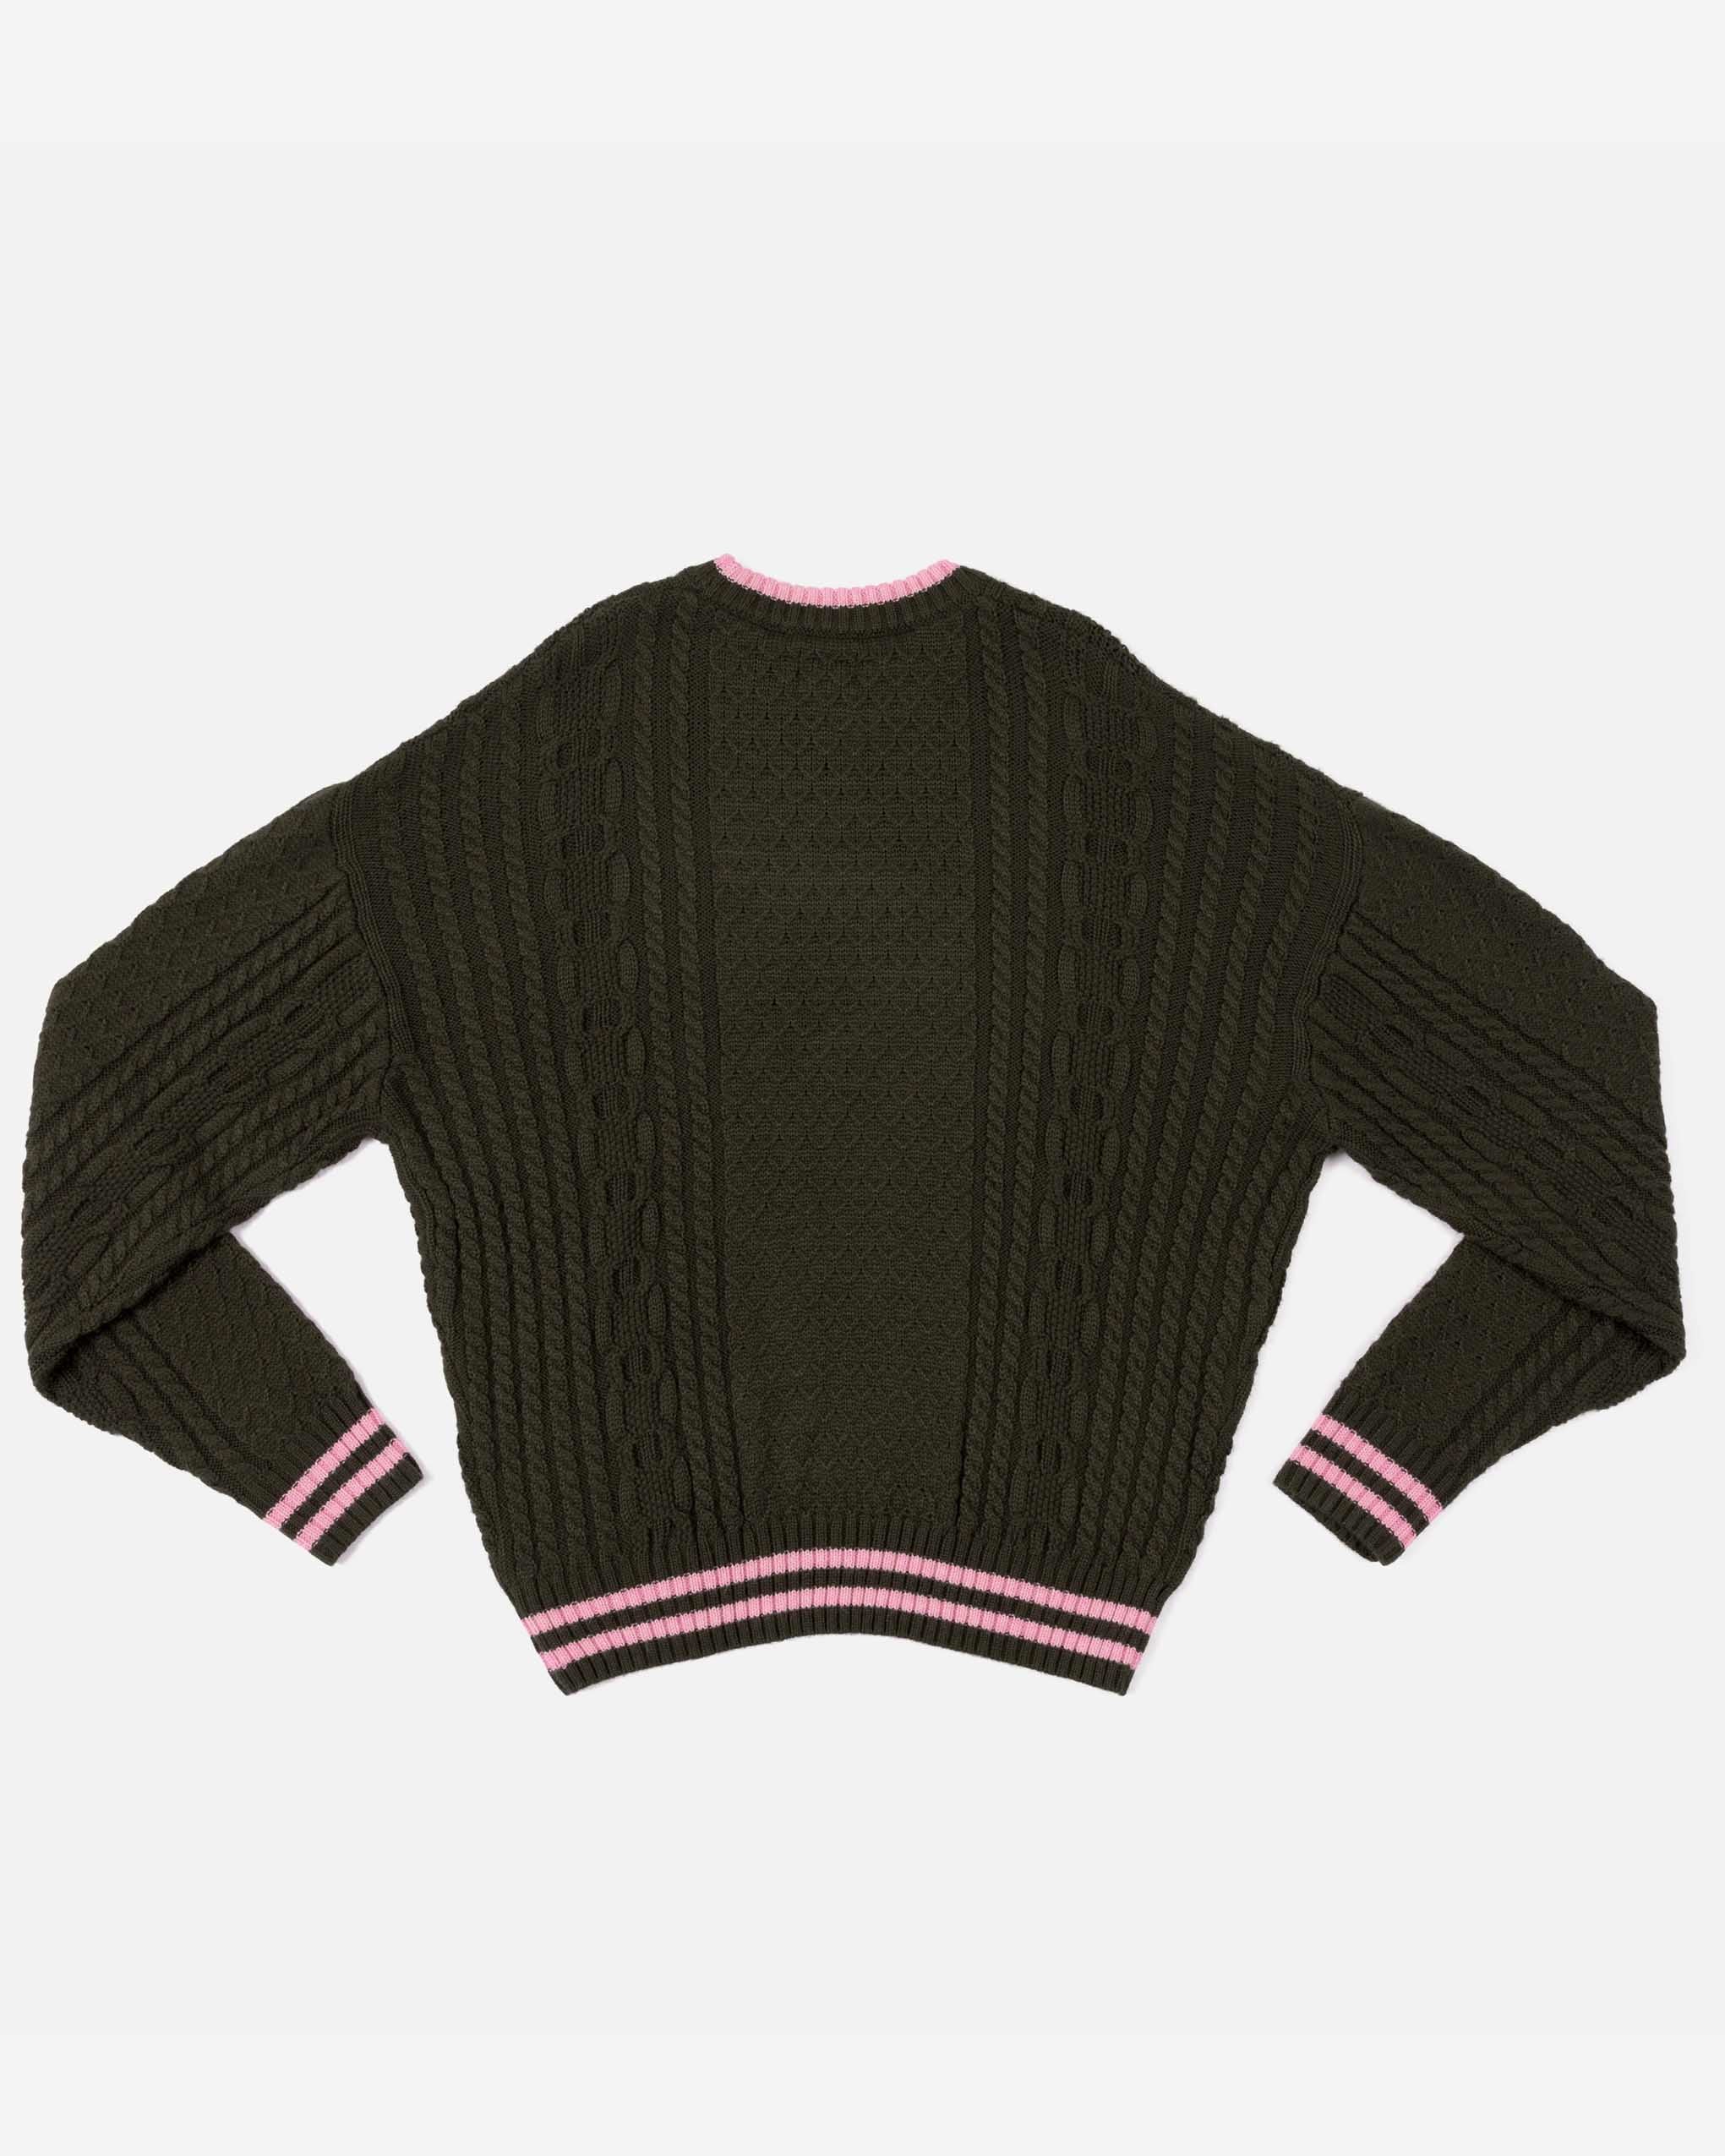 Patta Loves You Cable Knitted Sweater image